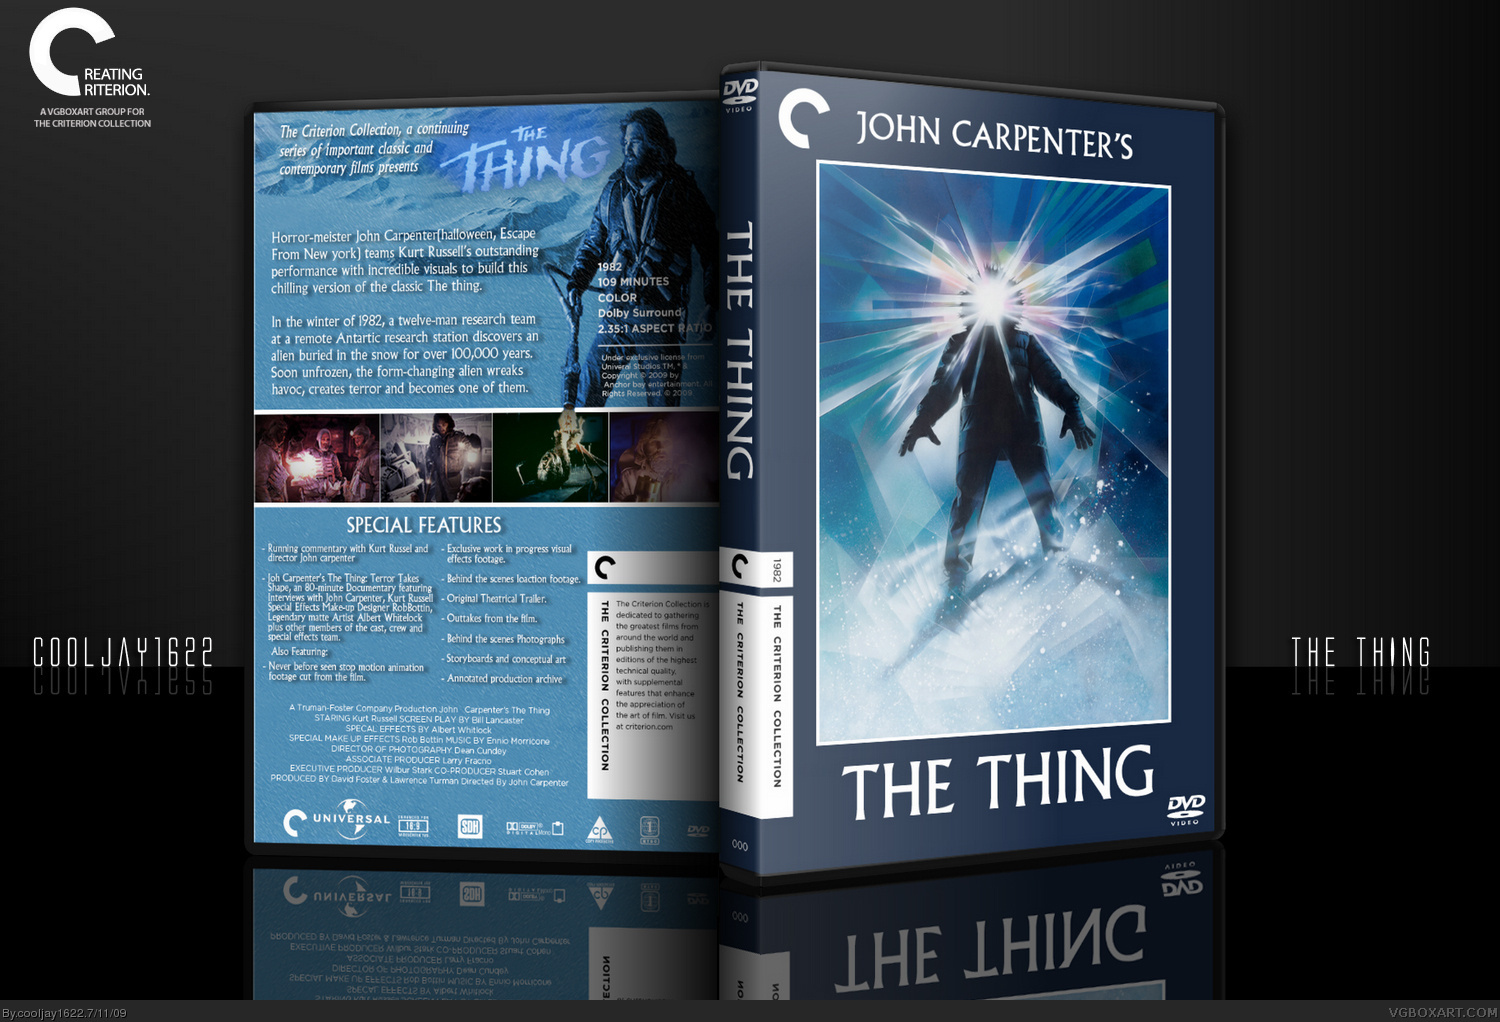 The Thing box cover